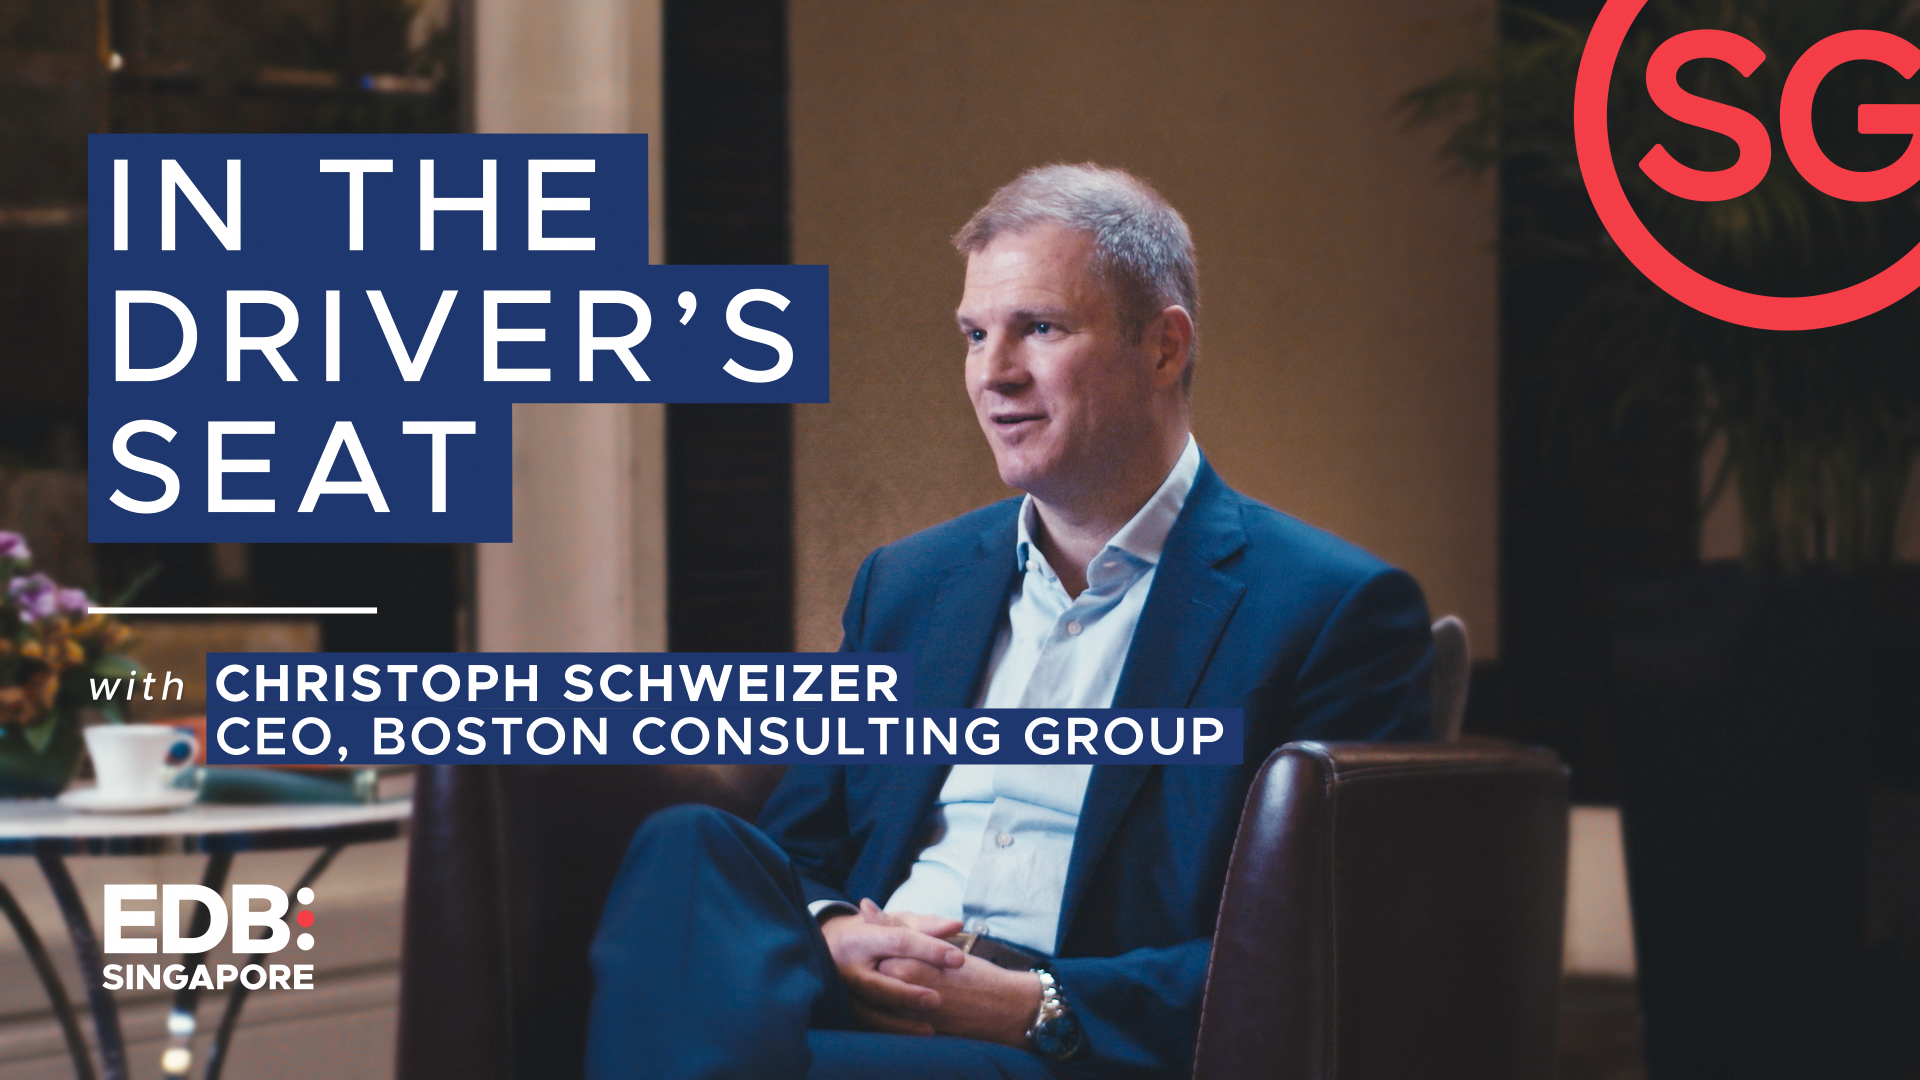 BCG CEO Christoph Schweizer on Singapore as an ideal business destination | In The Driver's Seat